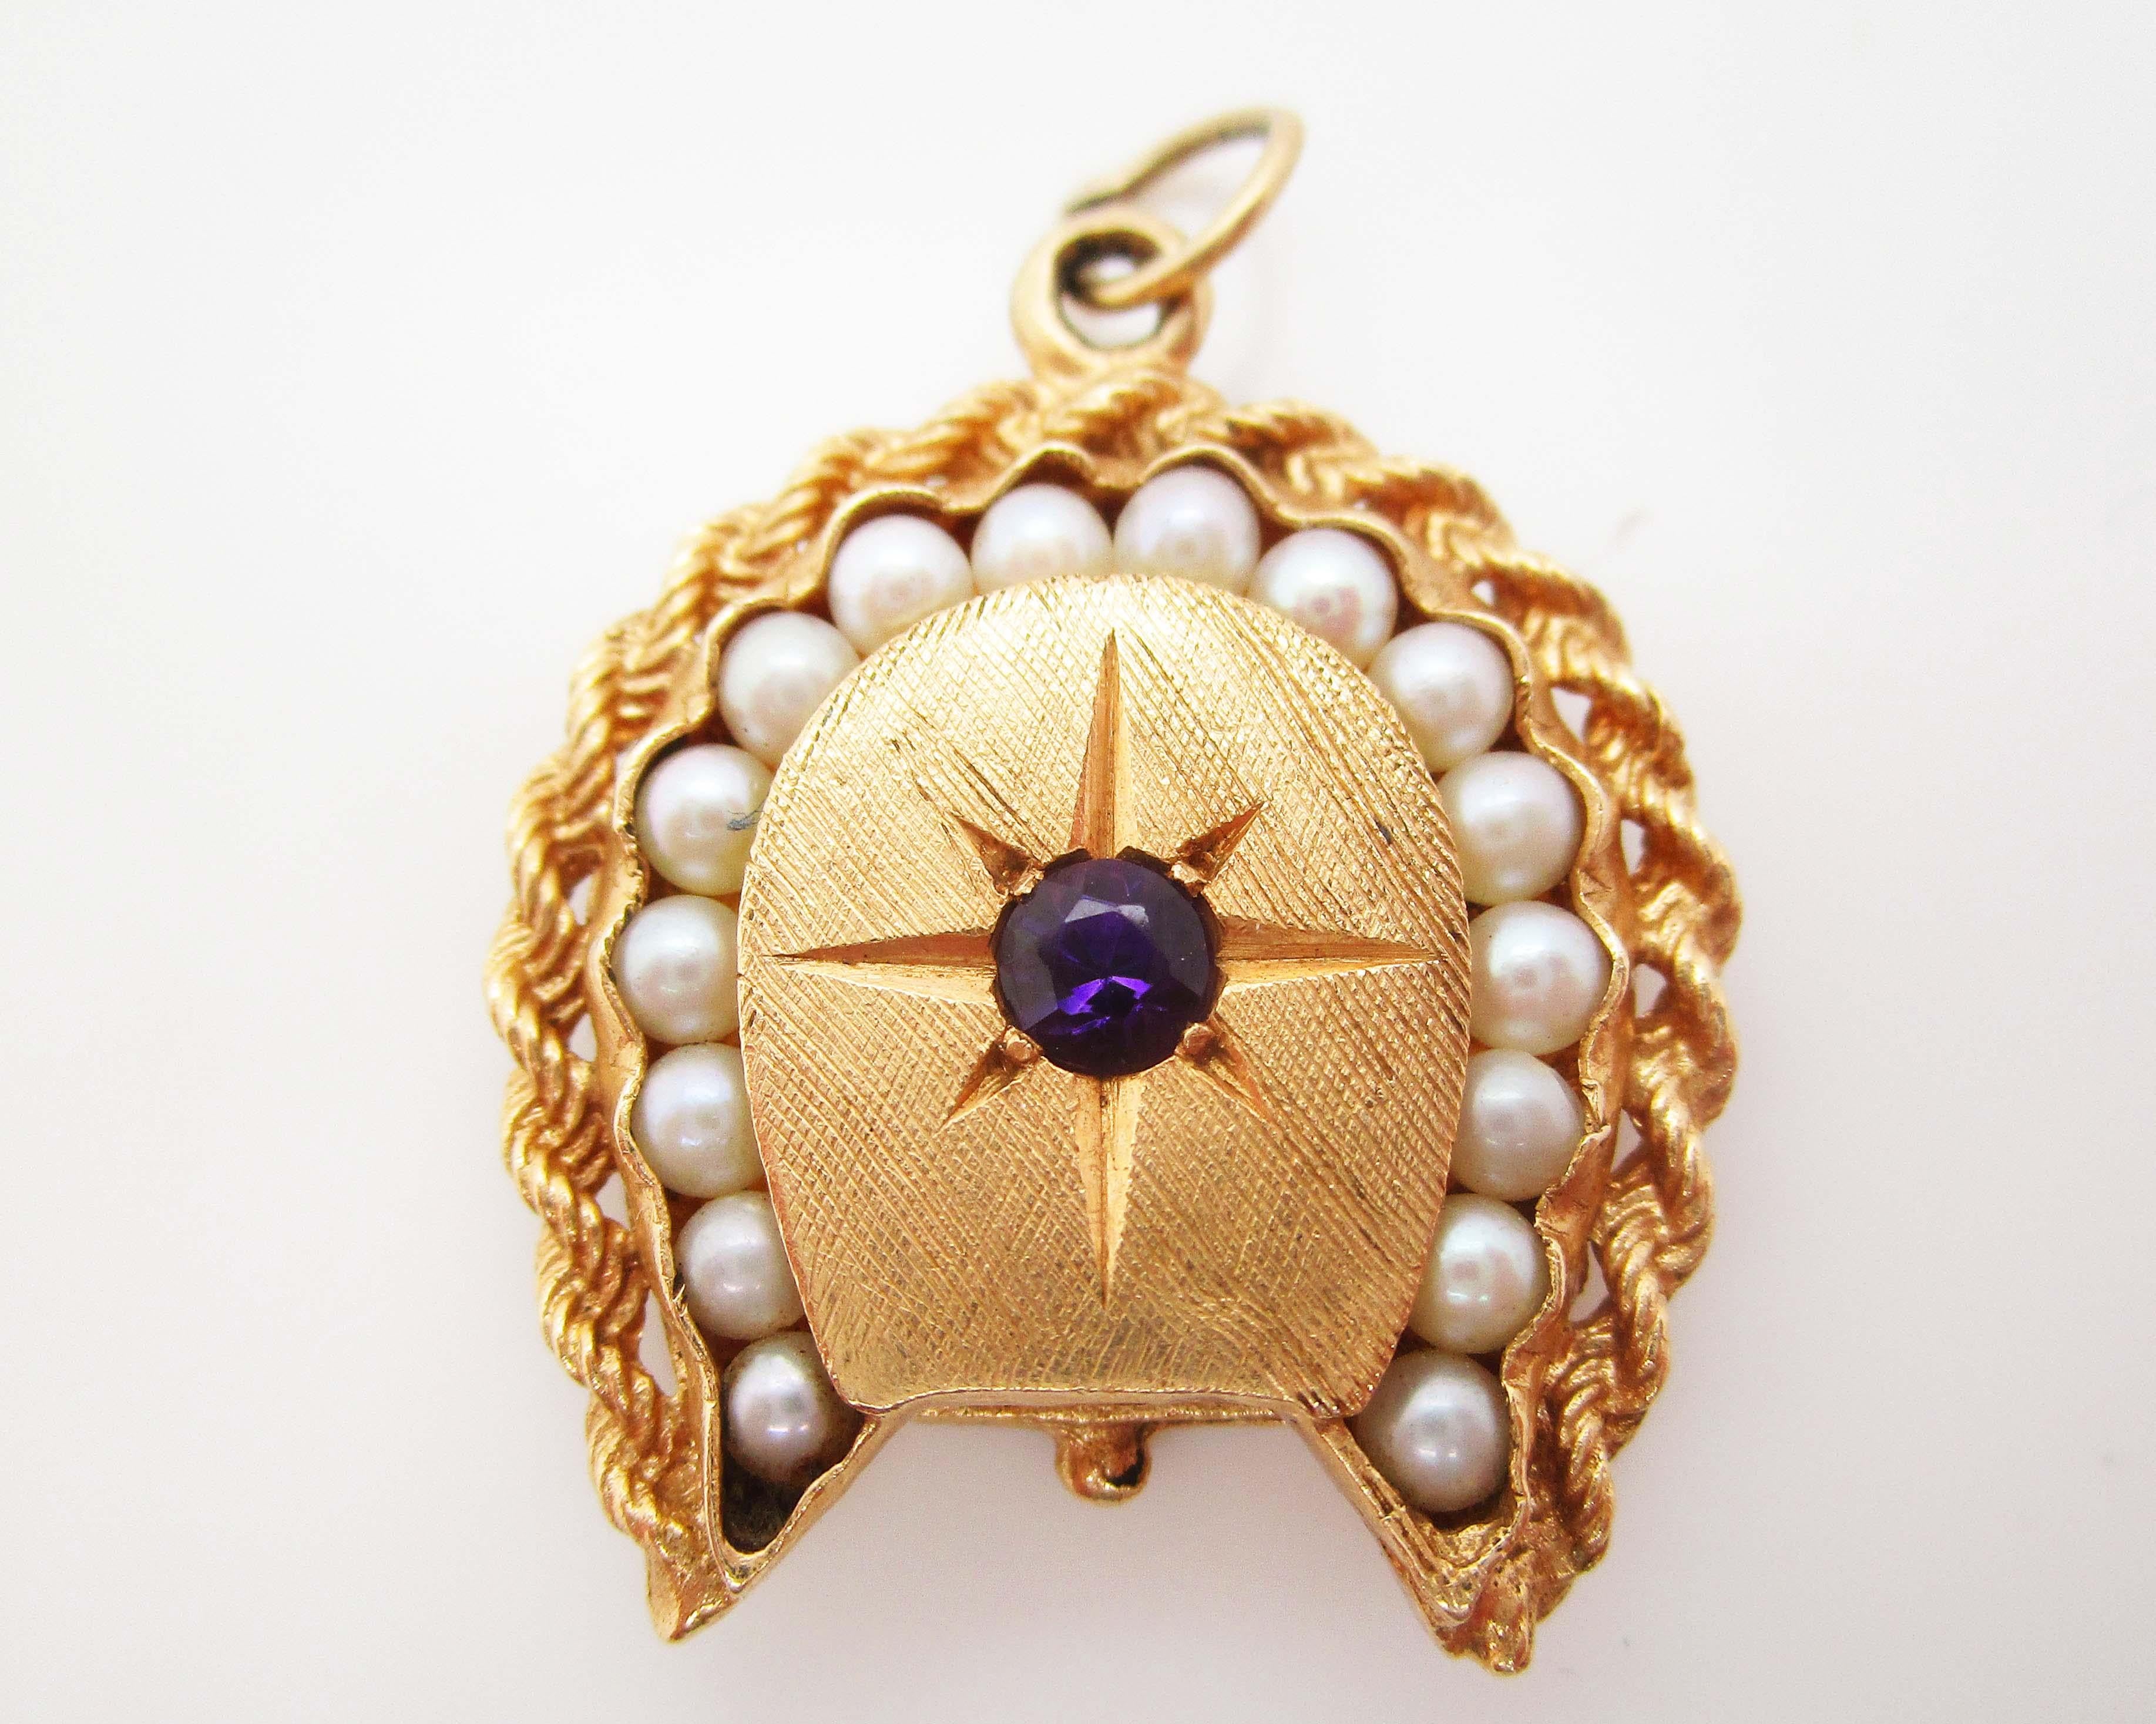 Modernist Midcentury 14K Yellow Gold Lucky Horseshoe Seed Pearl and Amethyst Pendant Lock